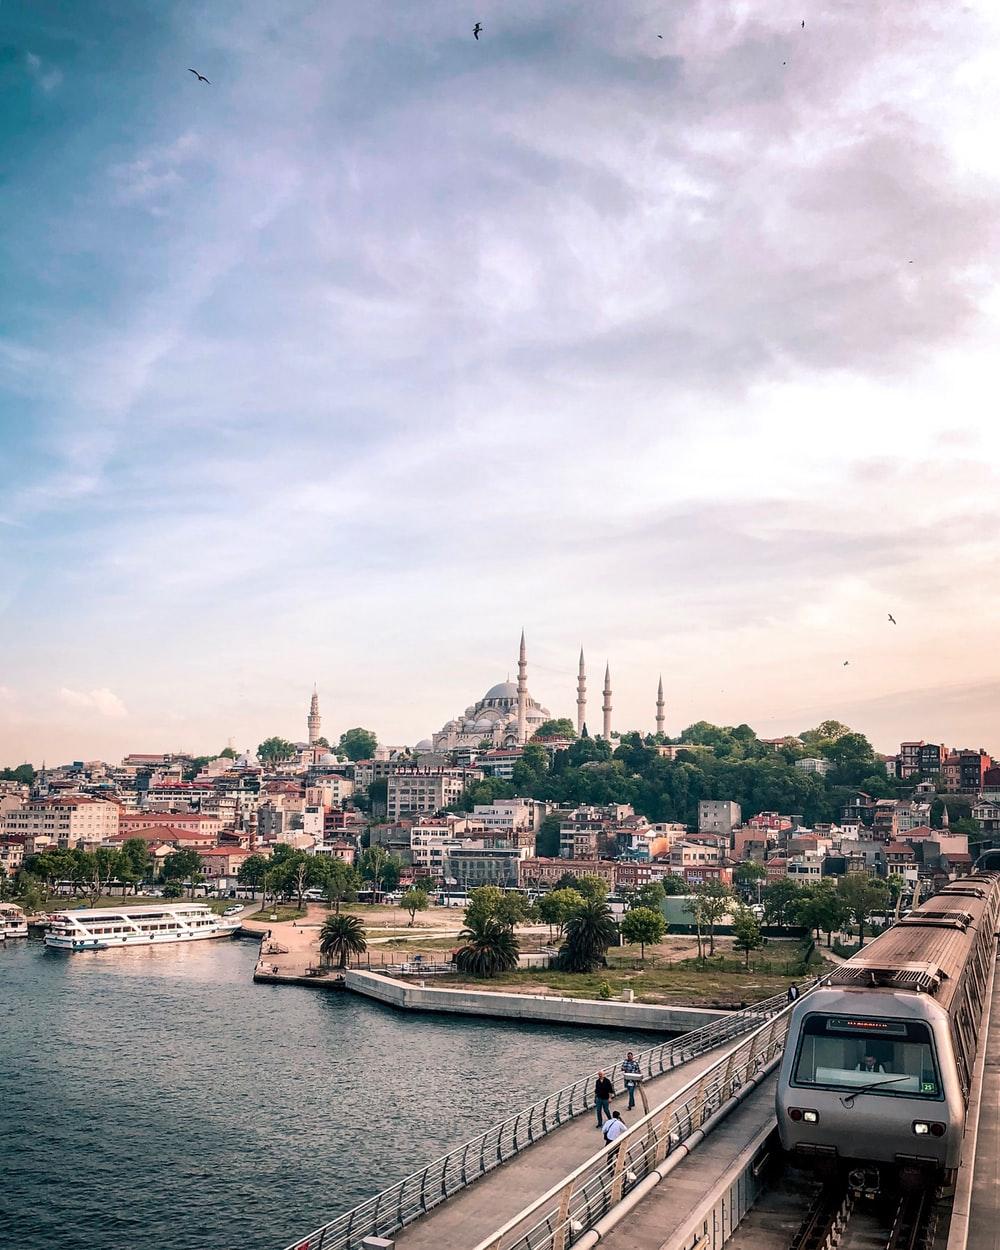 Stunning Istanbul Picture [Scenic Travel Photo]. Download Free Image